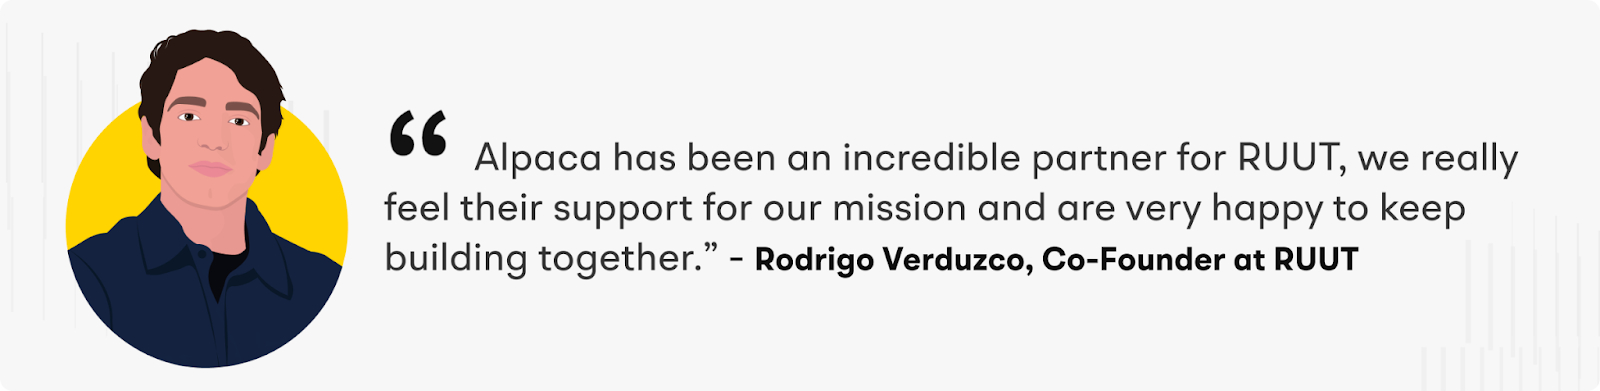 “Alpaca has been an incredible partner for RUUT, we really feel their support for our mission and are very happy to keep building together.” – Rodrigo Verduzco, Co-Founder